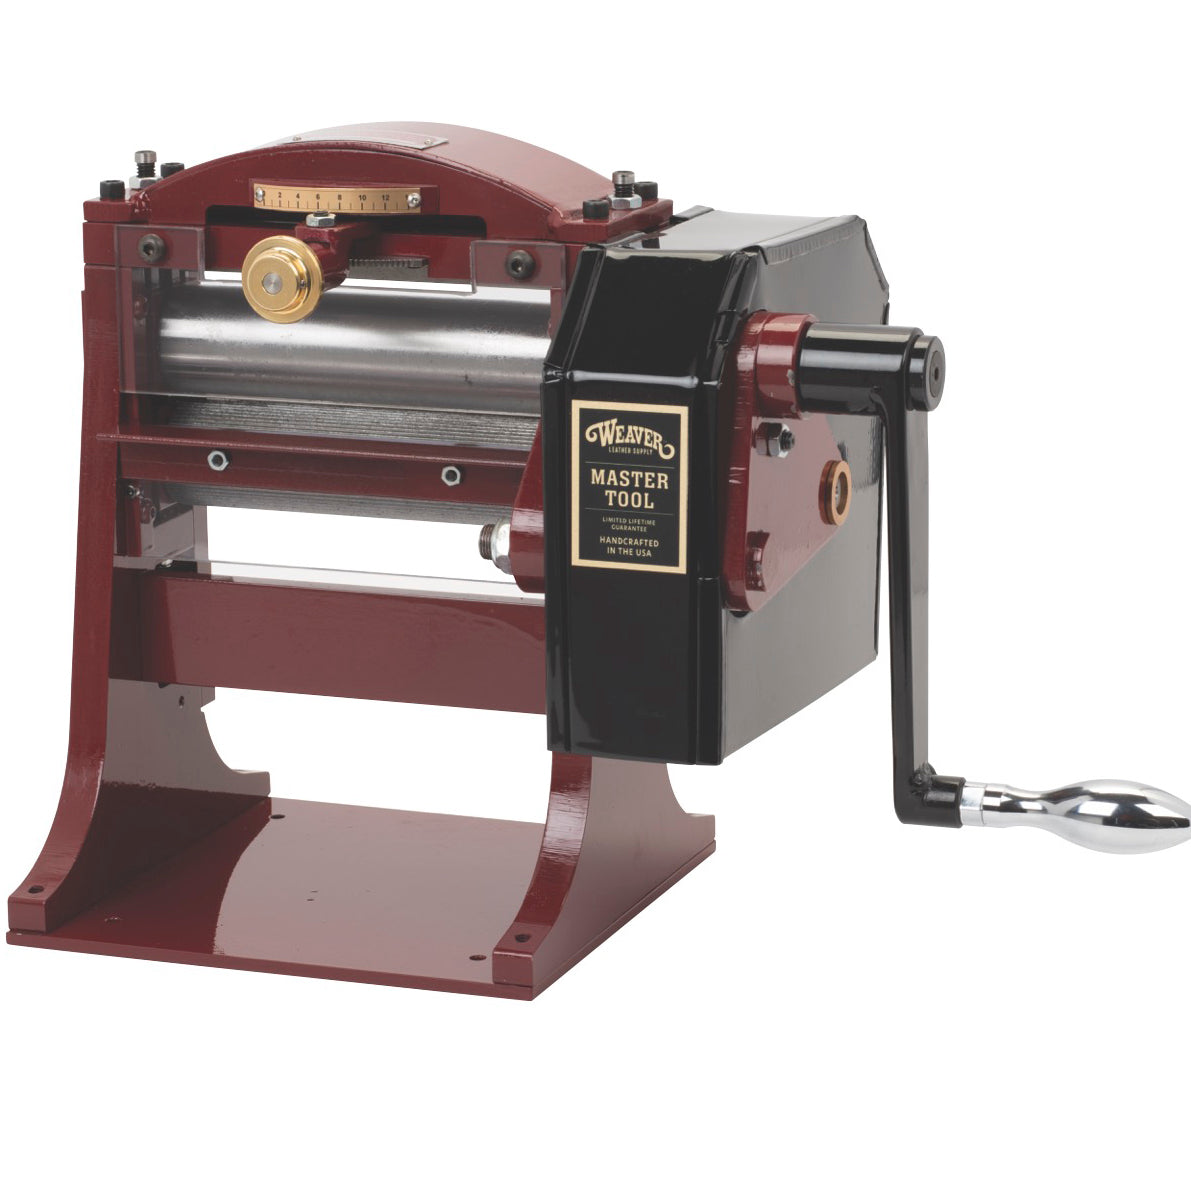 Weaver Leather Leather cutting Machines, featuring model 65-3080